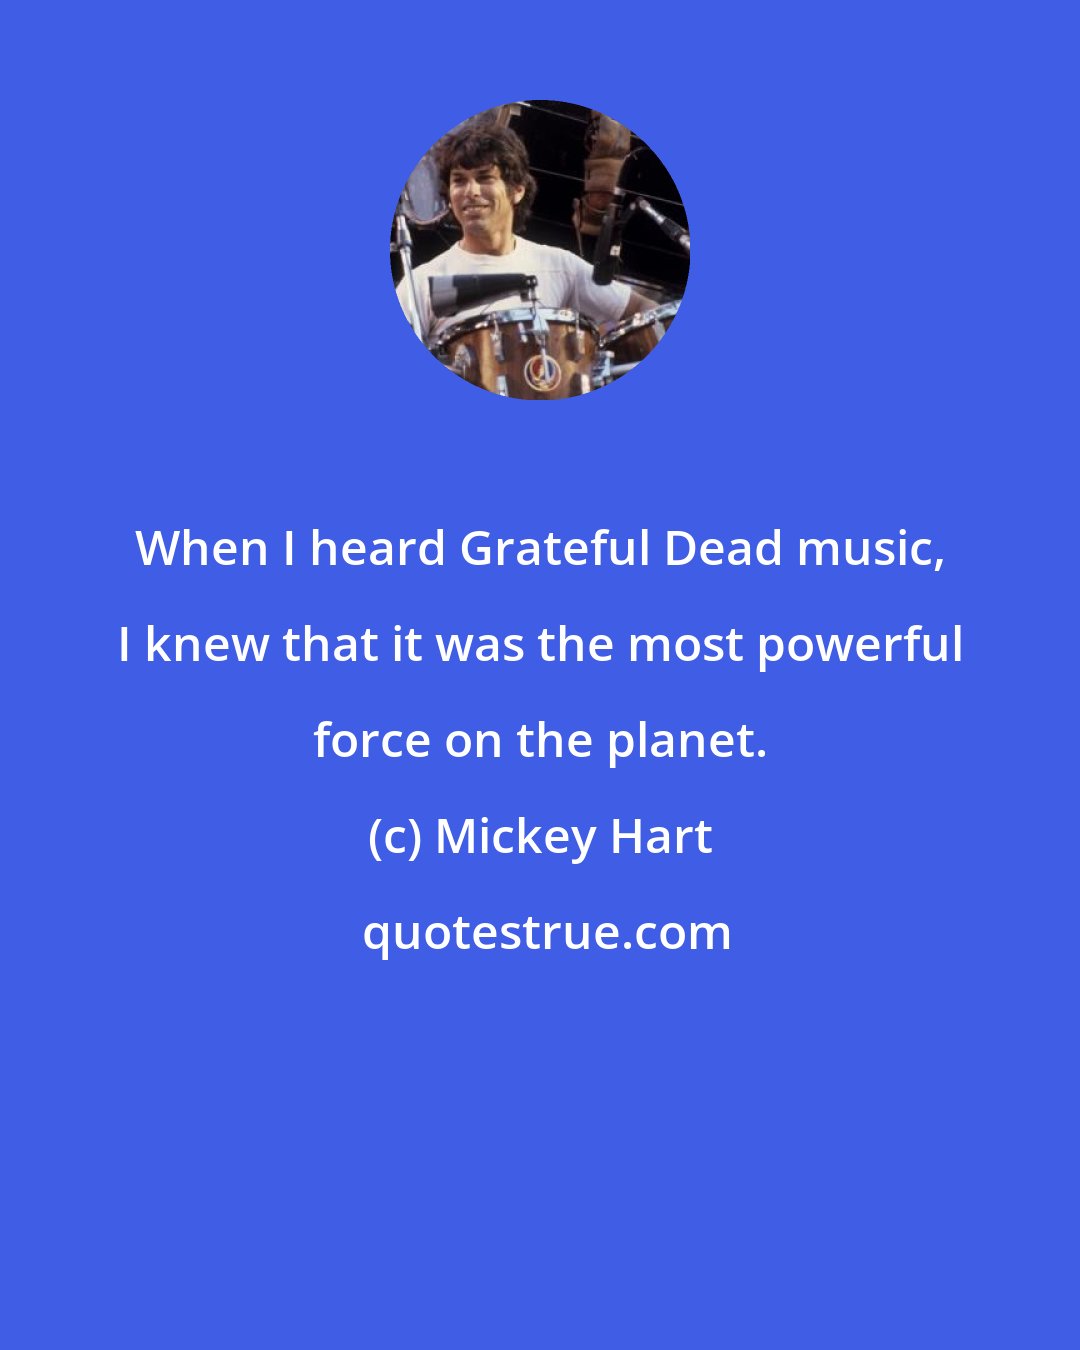 Mickey Hart: When I heard Grateful Dead music, I knew that it was the most powerful force on the planet.